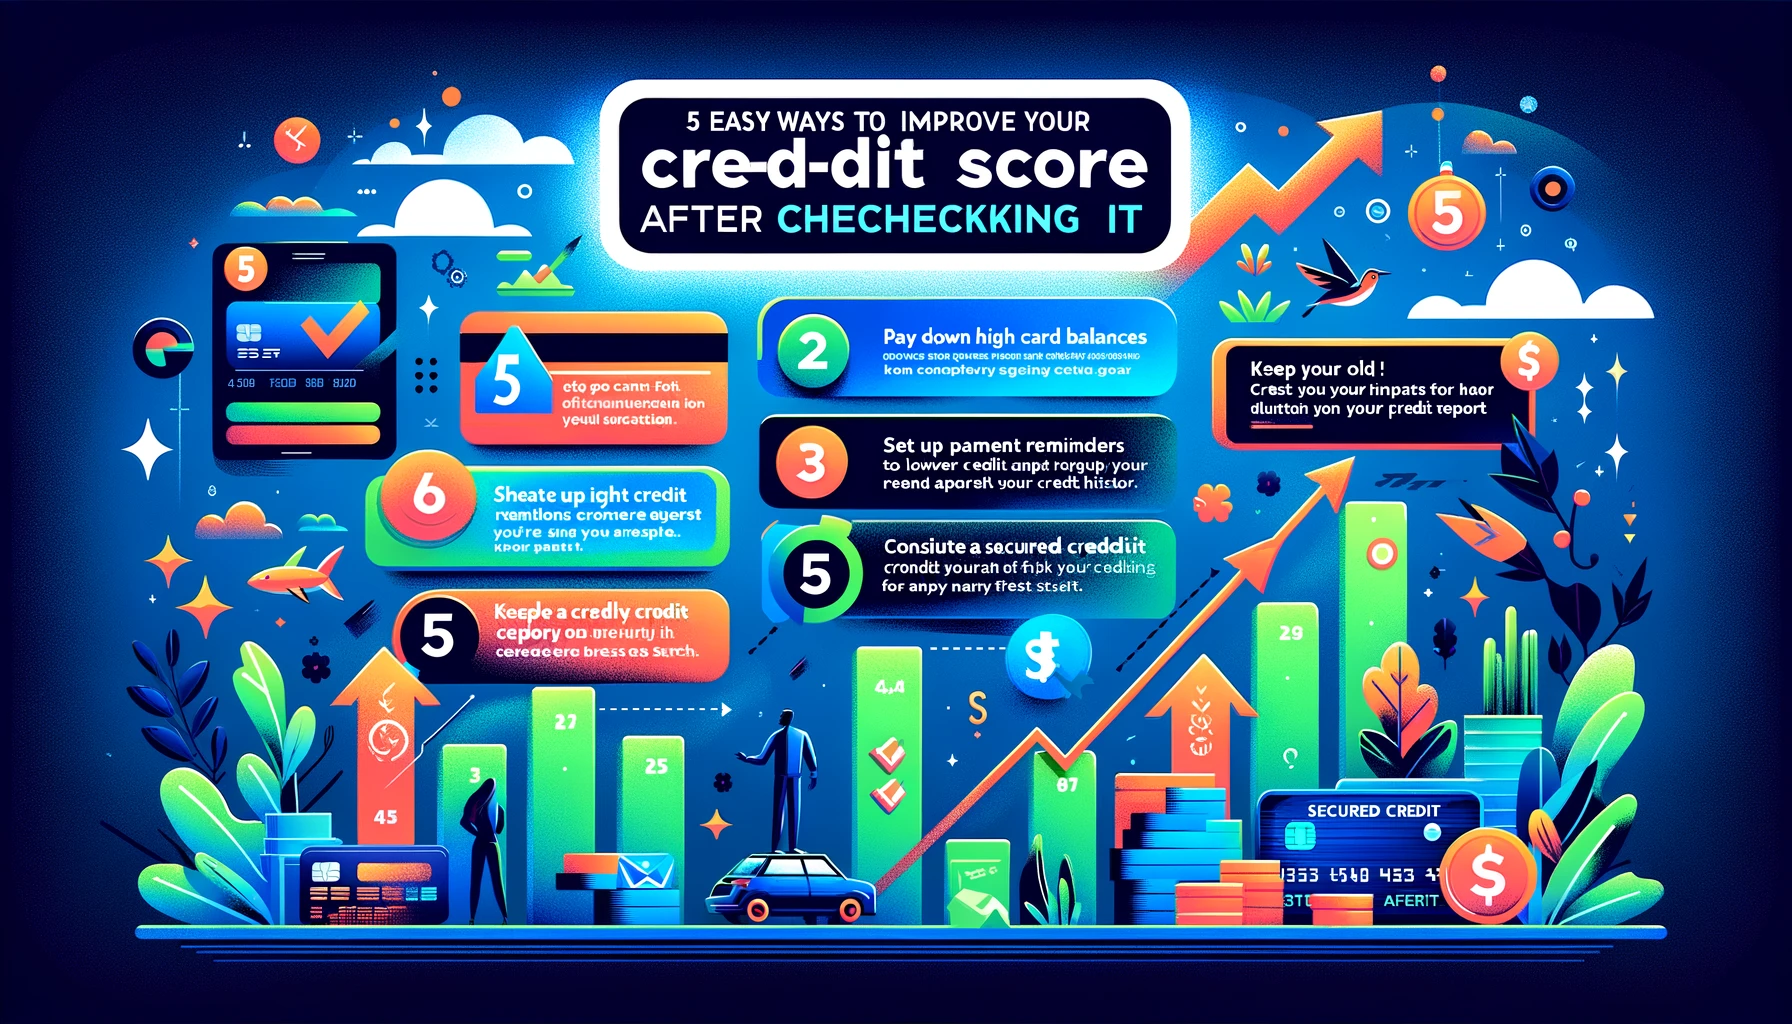 5 Easy Ways to Improve Your Credit Score After Checking It Are you ready to take control of your financial future? Your credit score plays a crucial role in shaping your financial well-being. Understanding how it works and knowing where you stand is the first step towards building a solid foundation for a brighter tomorrow. In this blog post, we'll explore five easy ways to improve your credit score after checking it. Let's dive in and unlock the secrets to boosting your credit health! Understanding Your Credit Score What is a credit score? It's a three-digit number that reflects your creditworthiness, ranging from 300 to 850. This score helps lenders assess the risk of lending you money. FICO Score and VantageScore are the two main scoring models used by creditors. While both evaluate your creditworthiness, they may use slightly different algorithms. Several factors impact your credit score, including payment history, amounts owed, length of credit history, new credit accounts, and types of credit used. Understanding these components can help you make informed decisions to improve your score over time. Checking your credit score regularly allows you to track changes and detect any errors or fraudulent activity promptly. Being aware of where you stand financially empowers you to take proactive steps towards enhancing your financial health. What is a credit score? Have you ever wondered what exactly a credit score is and why it holds so much importance in your financial life? Simply put, a credit score is a three-digit number that represents your creditworthiness based on your credit history. It serves as a numerical snapshot of how likely you are to repay borrowed money. Credit scores typically range from 300 to 850, with higher scores indicating lower risk for lenders and better borrowing terms for you. The most commonly used scoring models are FICO Score and VantageScore, each calculated slightly differently but serving the same purpose. Essentially, your credit score acts as a report card for your financial behavior. It takes into account factors like payment history, amounts owed, length of credit history, new credit accounts opened, and types of credits used. Understanding this number is crucial in managing your finances effectively and achieving your goals. FICO Score vs. VantageScore Understanding the differences between FICO Score and VantageScore can help you grasp how your credit score is calculated. FICO Score, developed by Fair Isaac Corporation, is widely used by lenders to assess credit risk. It ranges from 300 to 850 and considers payment history, amounts owed, length of credit history, new credit, and types of credit used. On the other hand, VantageScore was created collaboratively by the three major credit bureaus - Equifax, Experian, and TransUnion. It also ranges from 300 to 850 but may weigh certain factors differently than FICO Score. While both scoring models aim to predict a consumer's likelihood of repaying debt on time, they may produce slightly different scores due to variations in algorithms. It's essential to understand which model your potential lender uses when evaluating your creditworthiness as it can impact loan approval and interest rates offered. What impacts your credit score? Your credit score is influenced by various factors, all playing a role in determining your overall financial health. One significant factor is payment history. Consistently making on-time payments demonstrates reliability to creditors and can positively impact your score. Credit utilization ratio is another crucial element that affects your credit score. This ratio reflects the amount of available credit you are using; keeping this percentage low can boost your score. The length of your credit history also plays a part in determining your creditworthiness. Having a longer credit history shows lenders how well you manage debt over time. Additionally, the types of accounts you have, such as loans or credit cards, contribute to shaping your credit profile. Mixes of different account types can demonstrate responsible borrowing behavior. New inquiries and opening multiple accounts within a short period can potentially lower your score as it may indicate financial distress or increased risk for lenders. Importance of Checking Your Credit Score Understanding the importance of checking your credit score is crucial for maintaining financial health. Your credit score is a reflection of your financial responsibility and impacts your ability to secure loans, mortgages, and even rent an apartment. By regularly monitoring your credit score, you can catch any errors or fraudulent activity early on. Checking your credit score allows you to track changes over time and identify areas for improvement. It also gives you insight into how lenders view your creditworthiness, empowering you to take proactive steps to boost your score if needed. Additionally, staying informed about your credit standing puts you in control of your financial future. Whether you're working towards buying a home or simply want better interest rates on loans, keeping tabs on your credit score is essential. Take charge of this aspect of your finances by making it a habit to check in regularly with reputable sources like Credit Karma or AnnualCreditReport.com. Why check your credit score? Why check your credit score? Checking your credit score is like getting a health check-up for your finances. It provides valuable insights into your financial well-being and allows you to track your progress towards better credit health. By regularly monitoring your credit score, you can catch any errors or fraudulent activity early on, preventing potential damage to your financial reputation. Additionally, knowing where you stand financially empowers you to make informed decisions when it comes to borrowing money or making significant purchases. Your credit score influences many aspects of your life, from the interest rates you qualify for on loans and credit cards to even potential job opportunities. A good credit score opens doors to better financial options and savings in the long run. Checking your credit score regularly gives you the knowledge and control needed to improve and maintain a healthy financial future. It's a proactive step towards securing better financial stability and achieving your goals. Ways to Improve Your Credit Score Improving your credit score is essential for securing better financial opportunities. One way to boost your score is by paying bills on time, as late payments can negatively impact it. Setting up automatic payments or reminders can help you stay on track. Another effective strategy is reducing your overall debt. Aim to keep your credit card balances low and avoid maxing them out. A good rule of thumb is to use less than 30% of your available credit at any given time. Additionally, consider diversifying your credit mix by having a healthy combination of different types of accounts. This shows lenders that you can manage various forms of credit responsibly. Regularly checking your credit report for errors and disputing any inaccuracies can also help improve your score over time. Monitoring for identity theft and fraudulent activity is crucial in maintaining a healthy credit profile. Be patient and consistent with these efforts as positive changes to your credit score typically take time to reflect positively on your report. How you can improve your credit score Improving your credit score is essential for a healthy financial future. One way to boost your score is by making payments on time. Late payments can negatively impact your credit, so setting up reminders or automatic payments can help you stay on track. Another effective strategy is to pay down existing debt. High balances relative to your credit limits can hurt your score, so working towards lowering those balances can make a significant difference. Additionally, avoid opening multiple new accounts at once as this could signal financial instability and lower your score. Regularly reviewing your credit report for errors and disputing any inaccuracies can also improve your score over time. Maintaining a diverse mix of credit types, such as installment loans and revolving credit accounts, shows lenders that you can manage various types of debt responsibly. Be patient with the process of improving your credit score—it takes time and consistent effort but the results are worth it in the long run. Establishing Healthy Credit Habits Establishing Healthy Credit Habits is essential for improving your credit score over time. One key habit to adopt is making timely payments on all your bills, as this demonstrates reliability to creditors. Another important practice is keeping your credit card balances low relative to their limits – aim for a utilization rate of 30% or less. It's also beneficial to avoid opening multiple new accounts in a short period, as this can indicate financial instability and lower your score. Regularly reviewing your credit report allows you to spot errors or fraudulent activity early on, safeguarding your score. Moreover, maintaining a long history of responsible credit use showcases stability and boosts your rating. Refrain from closing old accounts unnecessarily; they contribute positively to the length of your credit history. By incorporating these habits into your financial routine, you pave the way for a healthier credit profile in the long run. Where smart habits take root Establishing healthy credit habits is essential when it comes to improving your credit score. To ensure long-term financial stability, it's crucial to cultivate smart habits that will positively impact your creditworthiness. One way to start is by making timely payments on all your bills and debts. By consistently paying off your balances on time, you demonstrate reliability to creditors and boost your credit score. Another important habit to adopt is keeping your credit utilization low. Aim to use only a small portion of the total credit available to you, as high utilization can signal financial distress and lower your score. Additionally, refrain from opening multiple new accounts within a short period. Opening too many accounts at once can appear risky to lenders and negatively affect your credit rating. Regularly monitoring your credit report for errors or suspicious activity is vital in maintaining a healthy score. By staying vigilant and addressing any issues promptly, you protect yourself from potential damage to your credit profile. Utilizing Credit Score Resources When it comes to improving your credit score, utilizing credit score resources can be a game-changer. These tools provide valuable insights into your financial health and offer guidance on how to boost your score. One useful resource is online credit monitoring services that give you regular updates on changes to your credit report. By staying informed, you can quickly address any discrepancies and track your progress towards a better score. Credit counseling agencies are another great resource for those looking to improve their credit. These professionals can offer personalized advice on how to manage debt, establish healthy financial habits, and ultimately raise your credit score. Additionally, many banks and financial institutions now provide free access to credit scores for their customers. Take advantage of these offerings to stay on top of your score and make more informed decisions about your finances. Remember, knowledge is power when it comes to managing your credit. By utilizing the various resources available, you can take control of your financial future and work towards achieving the credit score you desire. Credit score resources Explore a variety of credit score resources available online and through financial institutions to continue monitoring and improving your credit score. By utilizing these tools effectively, you can stay on top of any changes in your credit report, track your progress, and make informed decisions about your financial health. Remember, maintaining a good credit score is crucial for achieving your long-term financial goals and securing favorable interest rates on loans. Take charge of your credit score today by implementing the strategies mentioned above and leveraging the resources at your disposal. Here's to a brighter financial future!